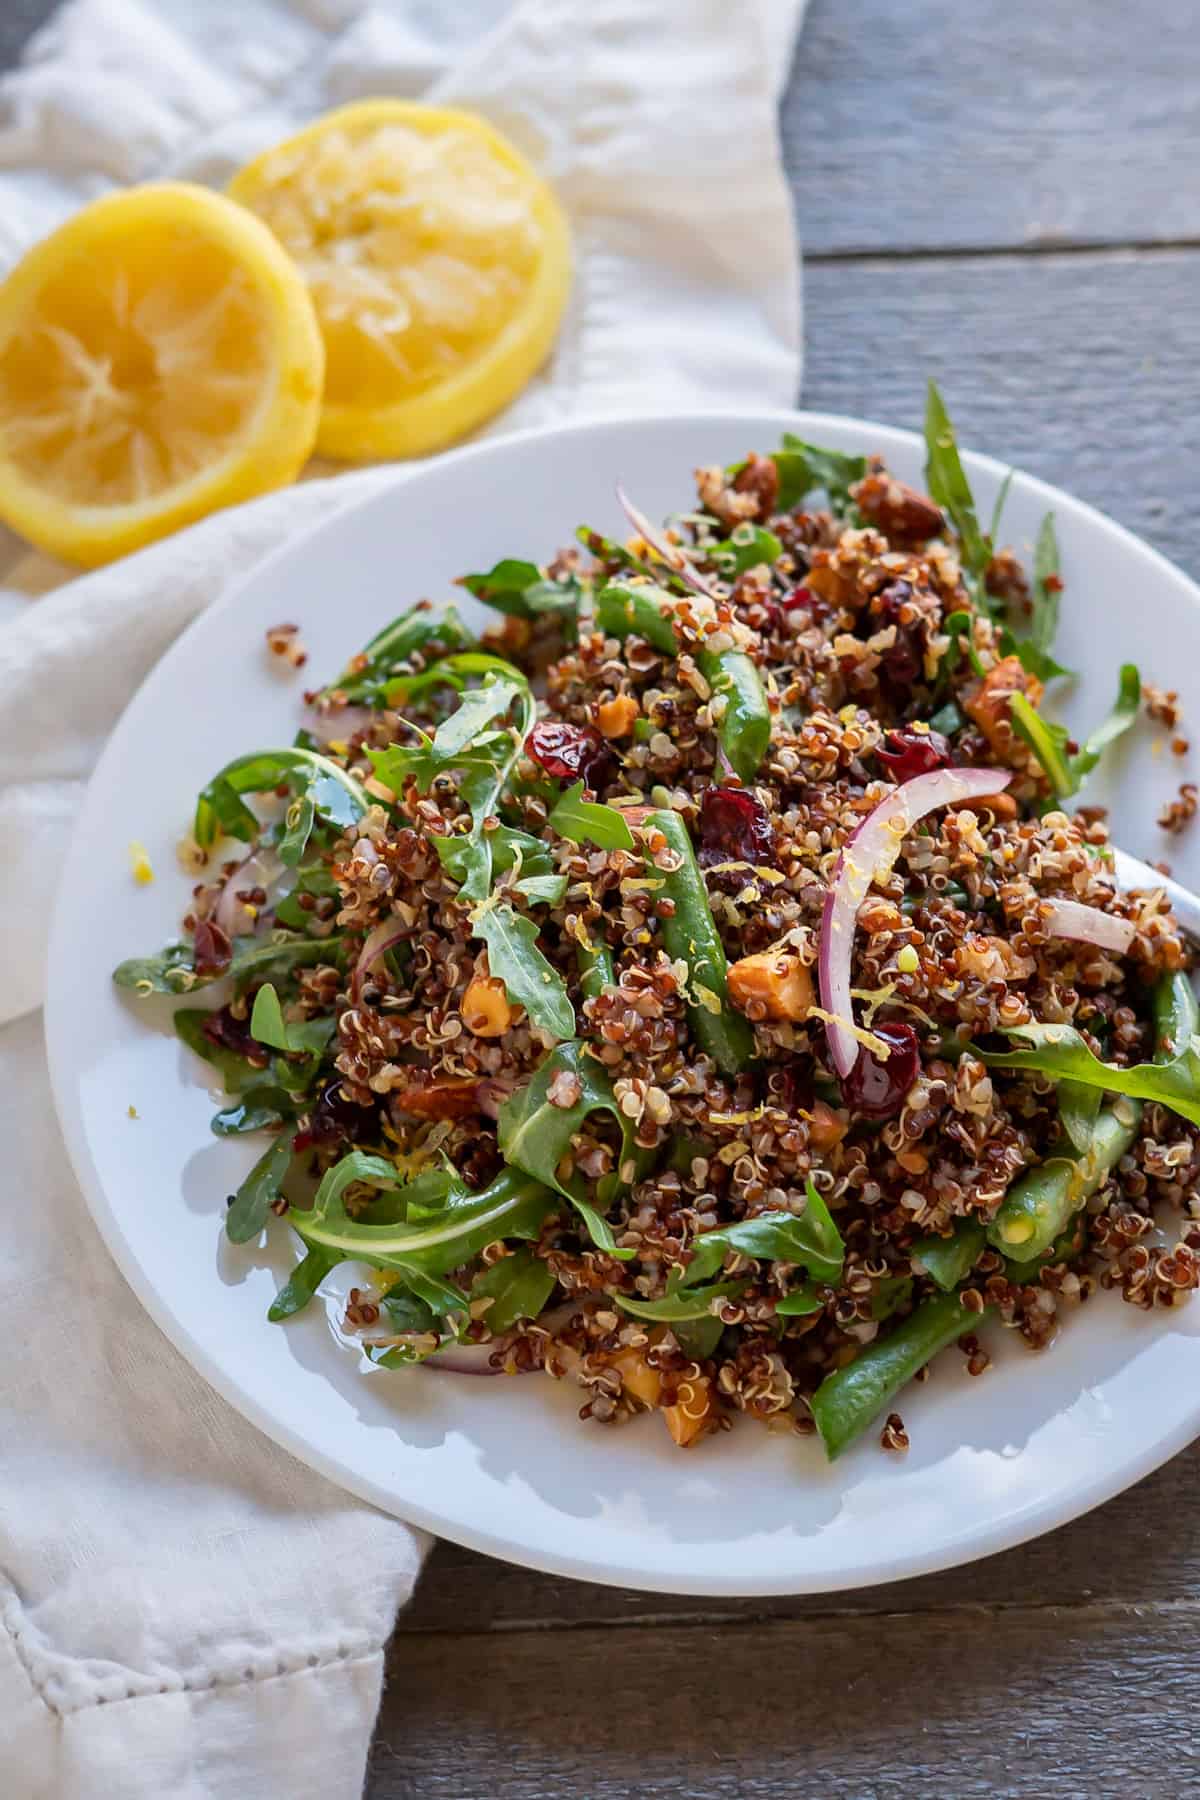 A large lunch serving of arugula quinoa salad on a plate.